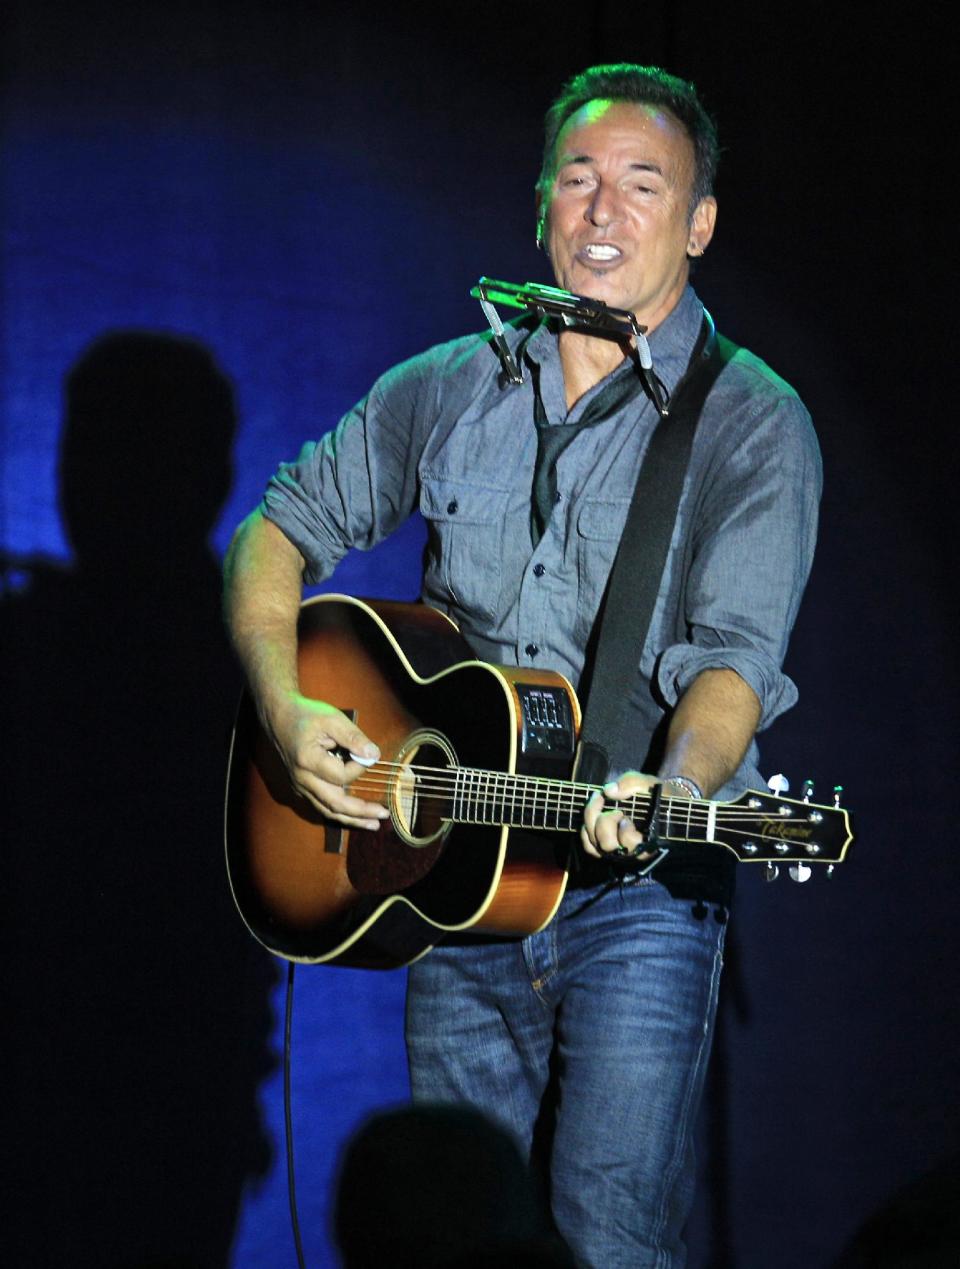 Singer/songwriter Bruce Springsteen performs at a campaign event for President Barack Obama, Thursday, Oct. 18, 2012, in Parma, Ohio. (AP Photo/Tony Dejak)